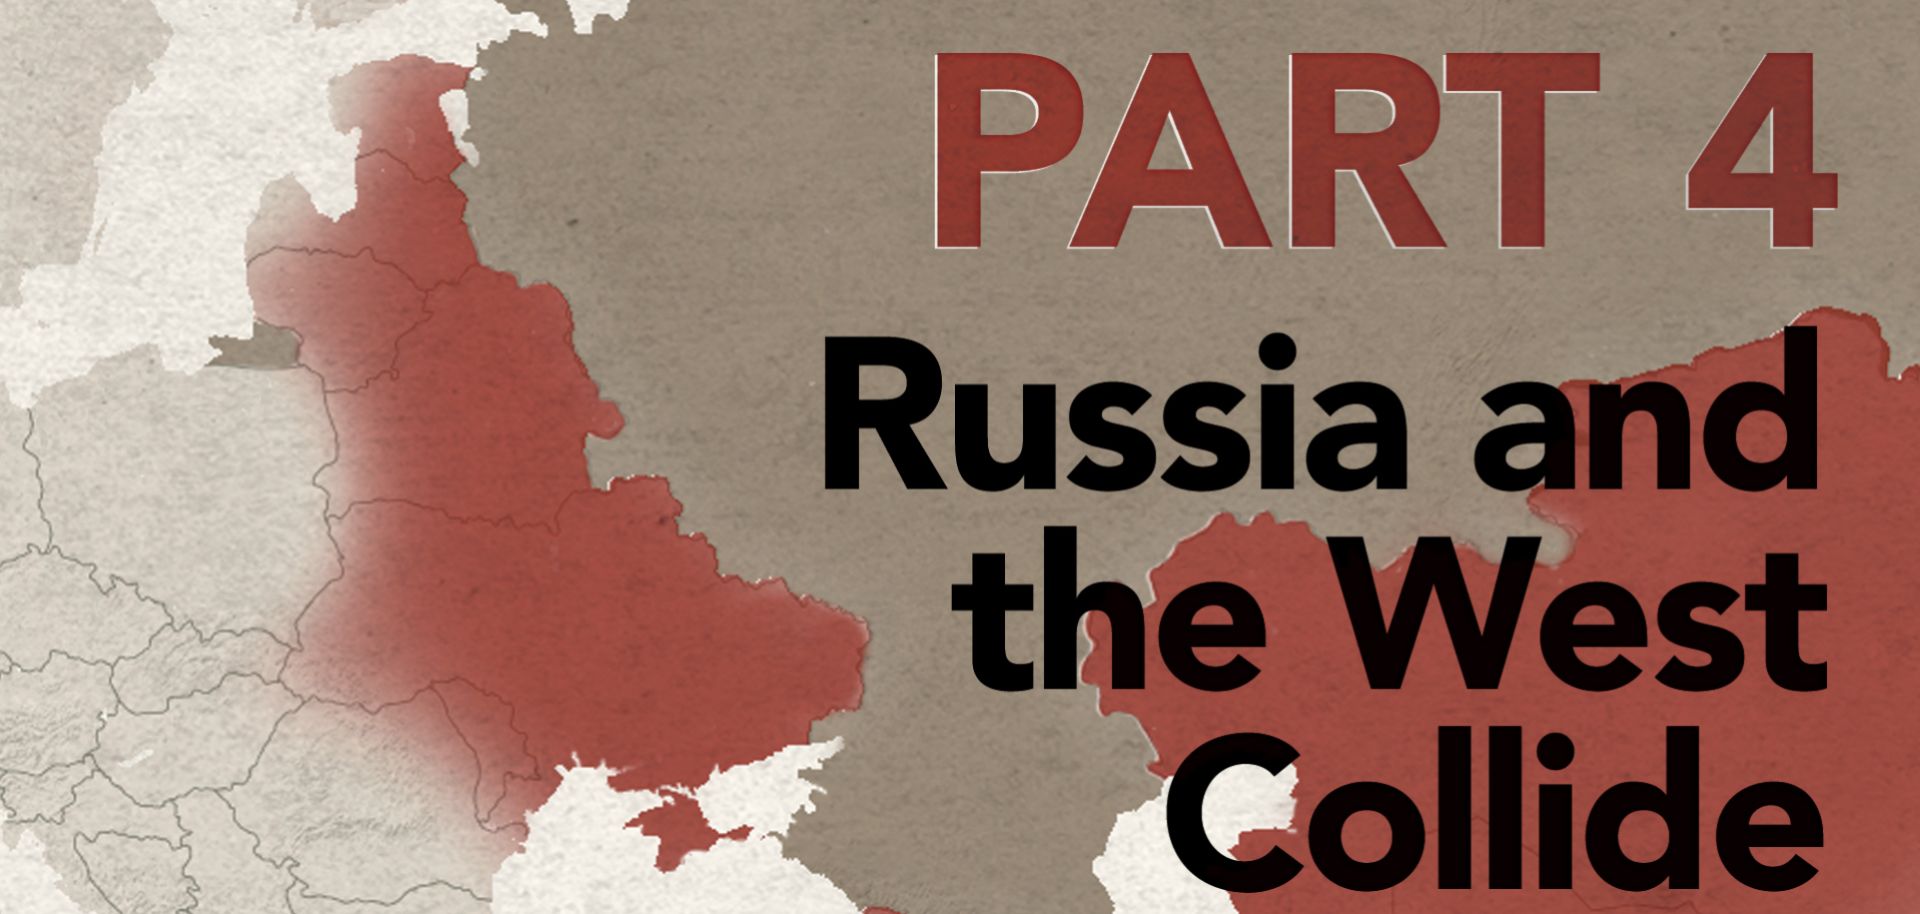 In the coming decades, the Caucasus will continue to be an important battleground for Russia and the West.